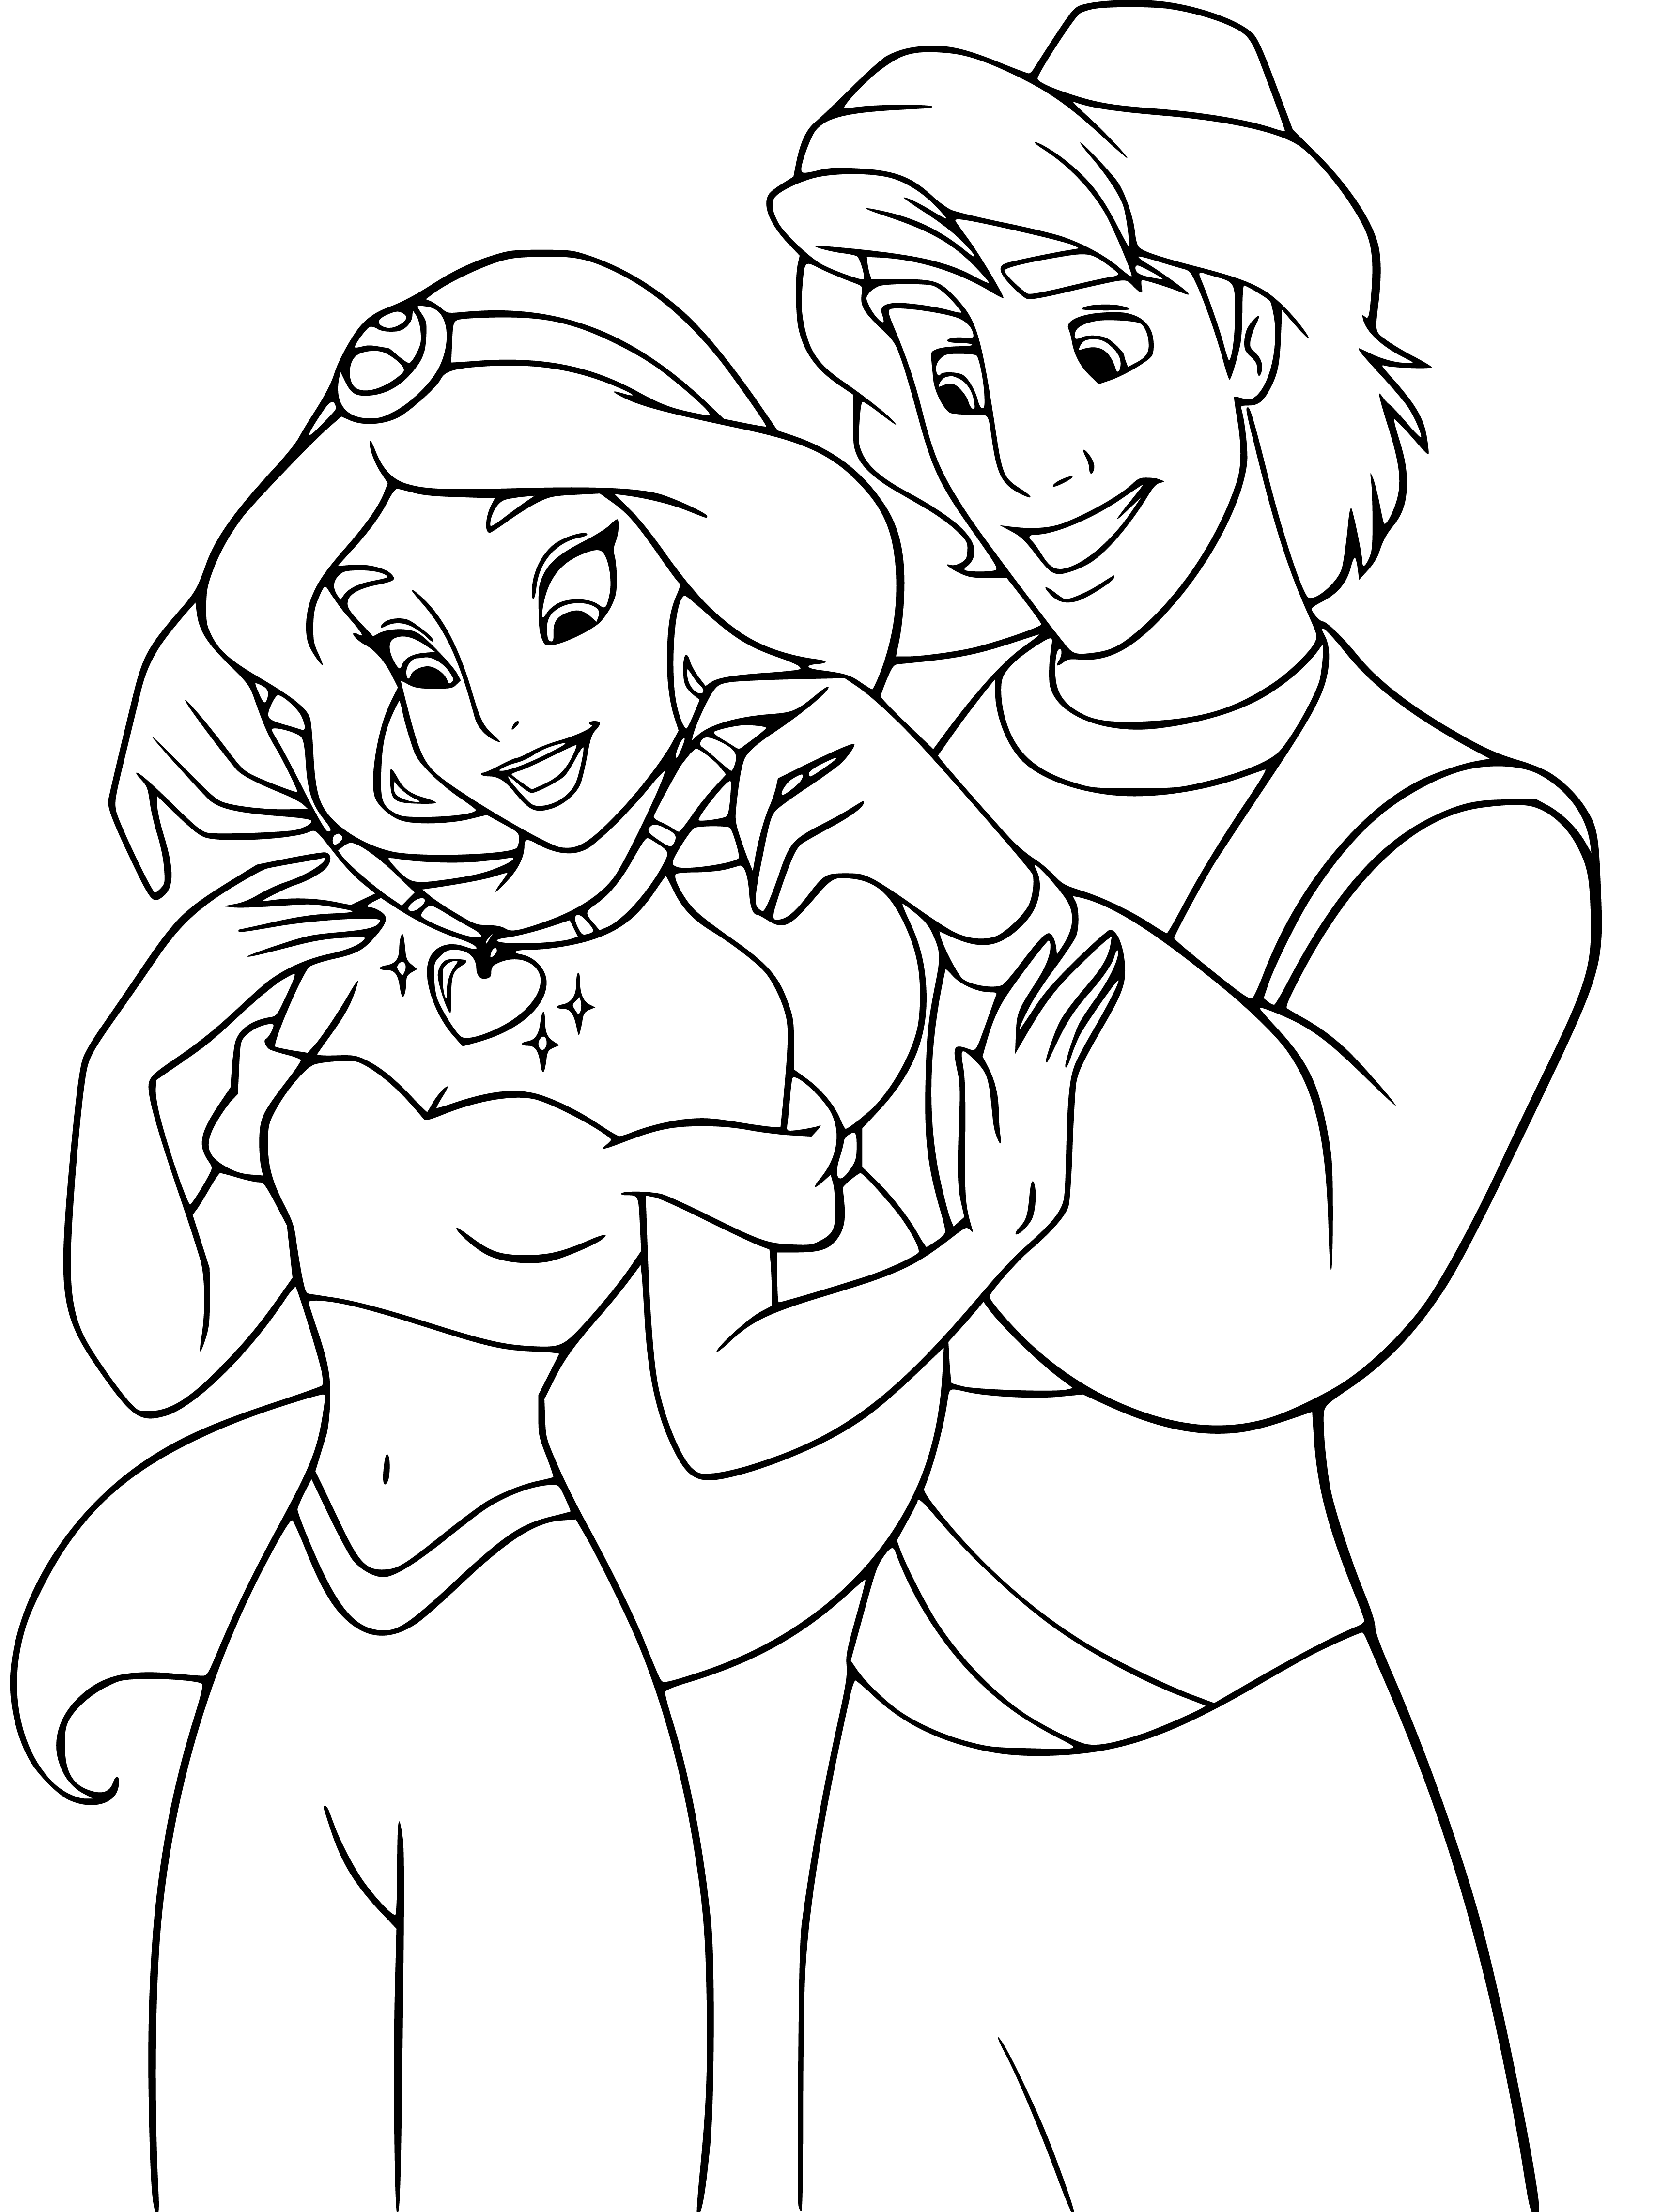 Princess Jasmine and Aladdin sheet Coloring Page Printable for Kids, Free, Simple and Easy, as PDF